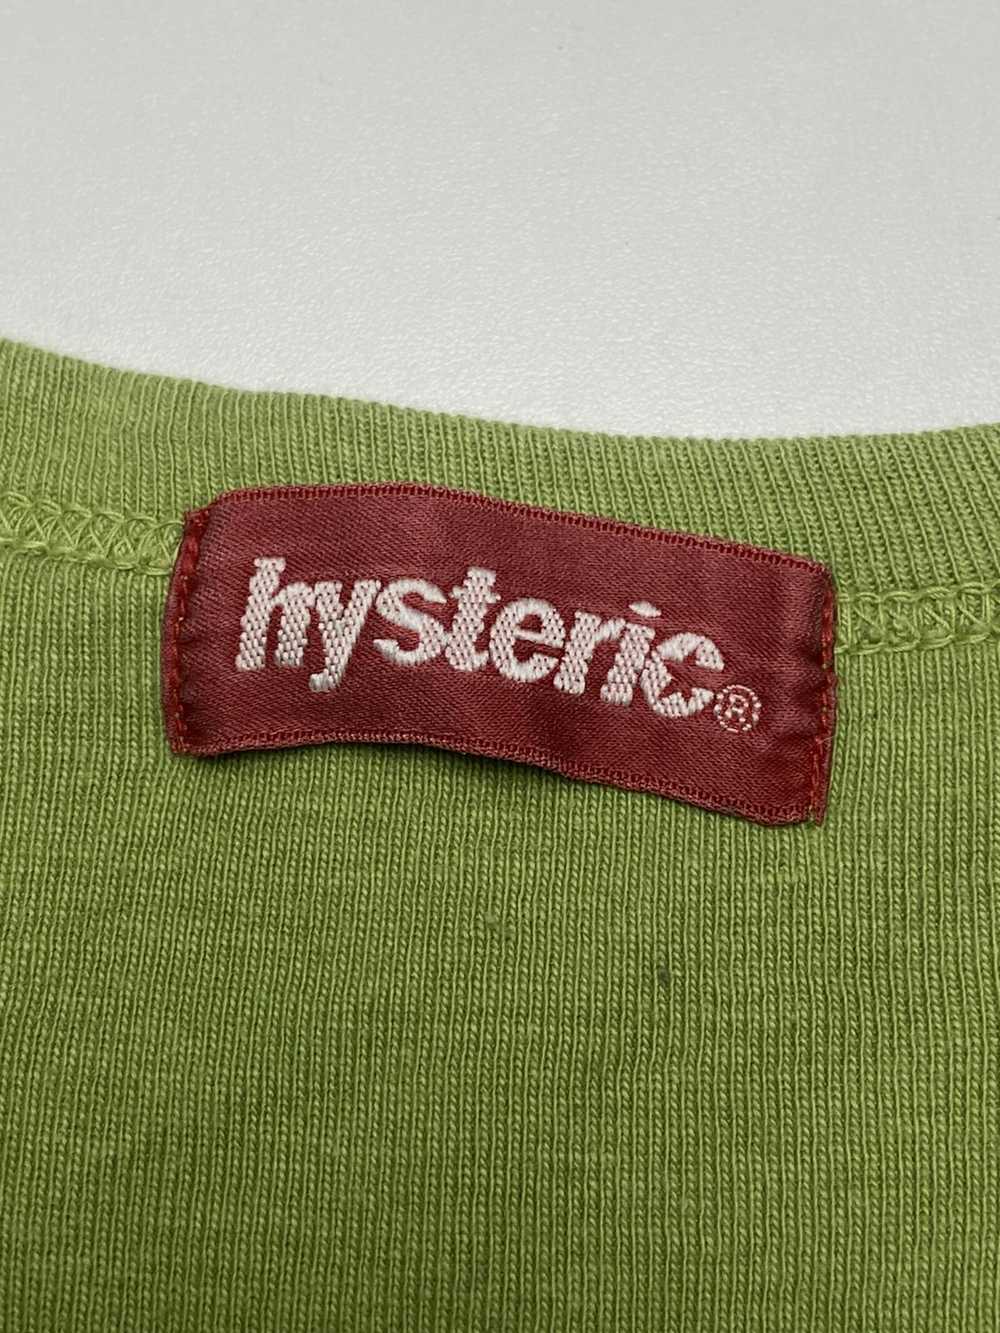 Hysteric Glamour × Japanese Brand 1990s Hysteric … - image 4